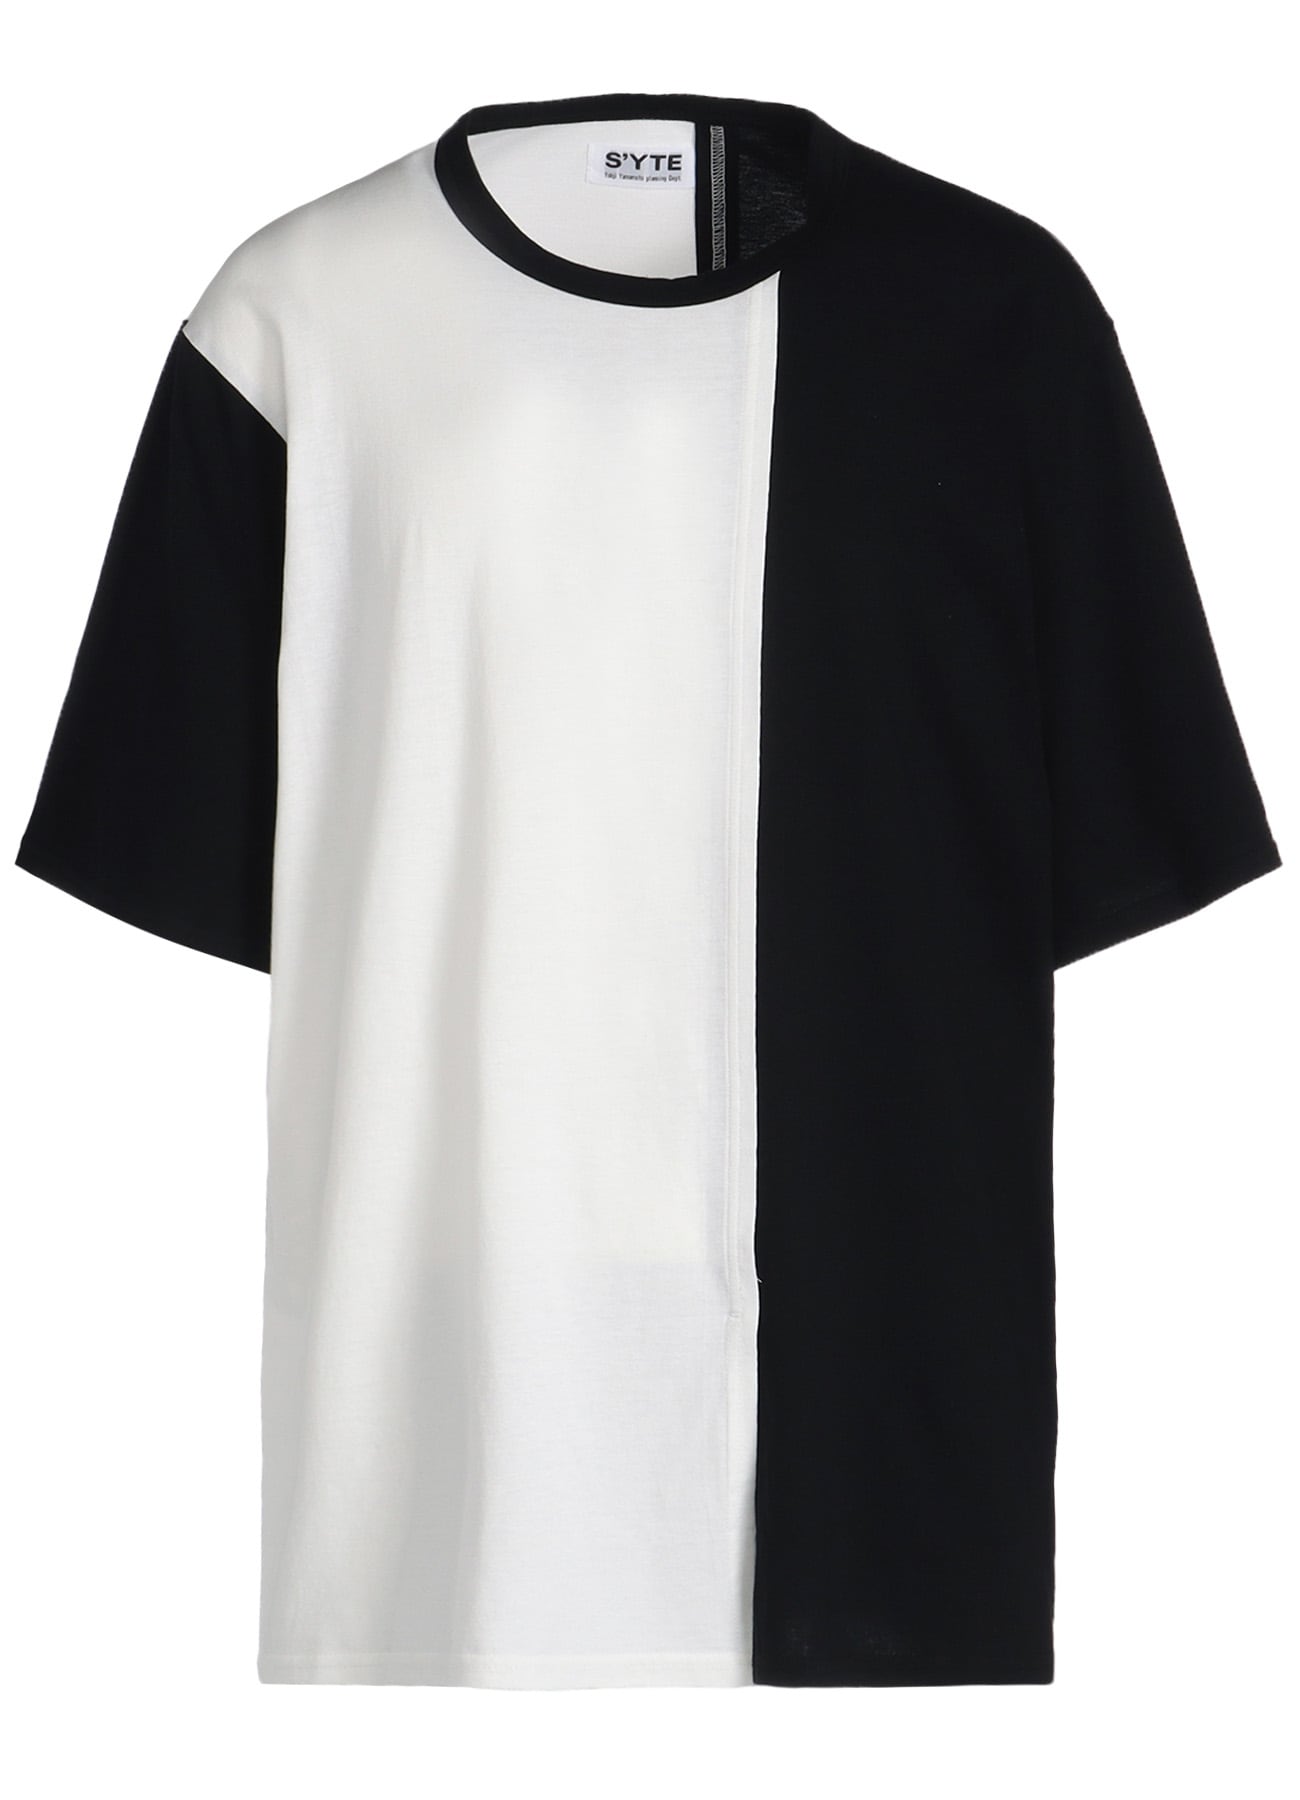 COLOR-SWITCHED ASYMMETRICAL DESIGN T-SHIRT